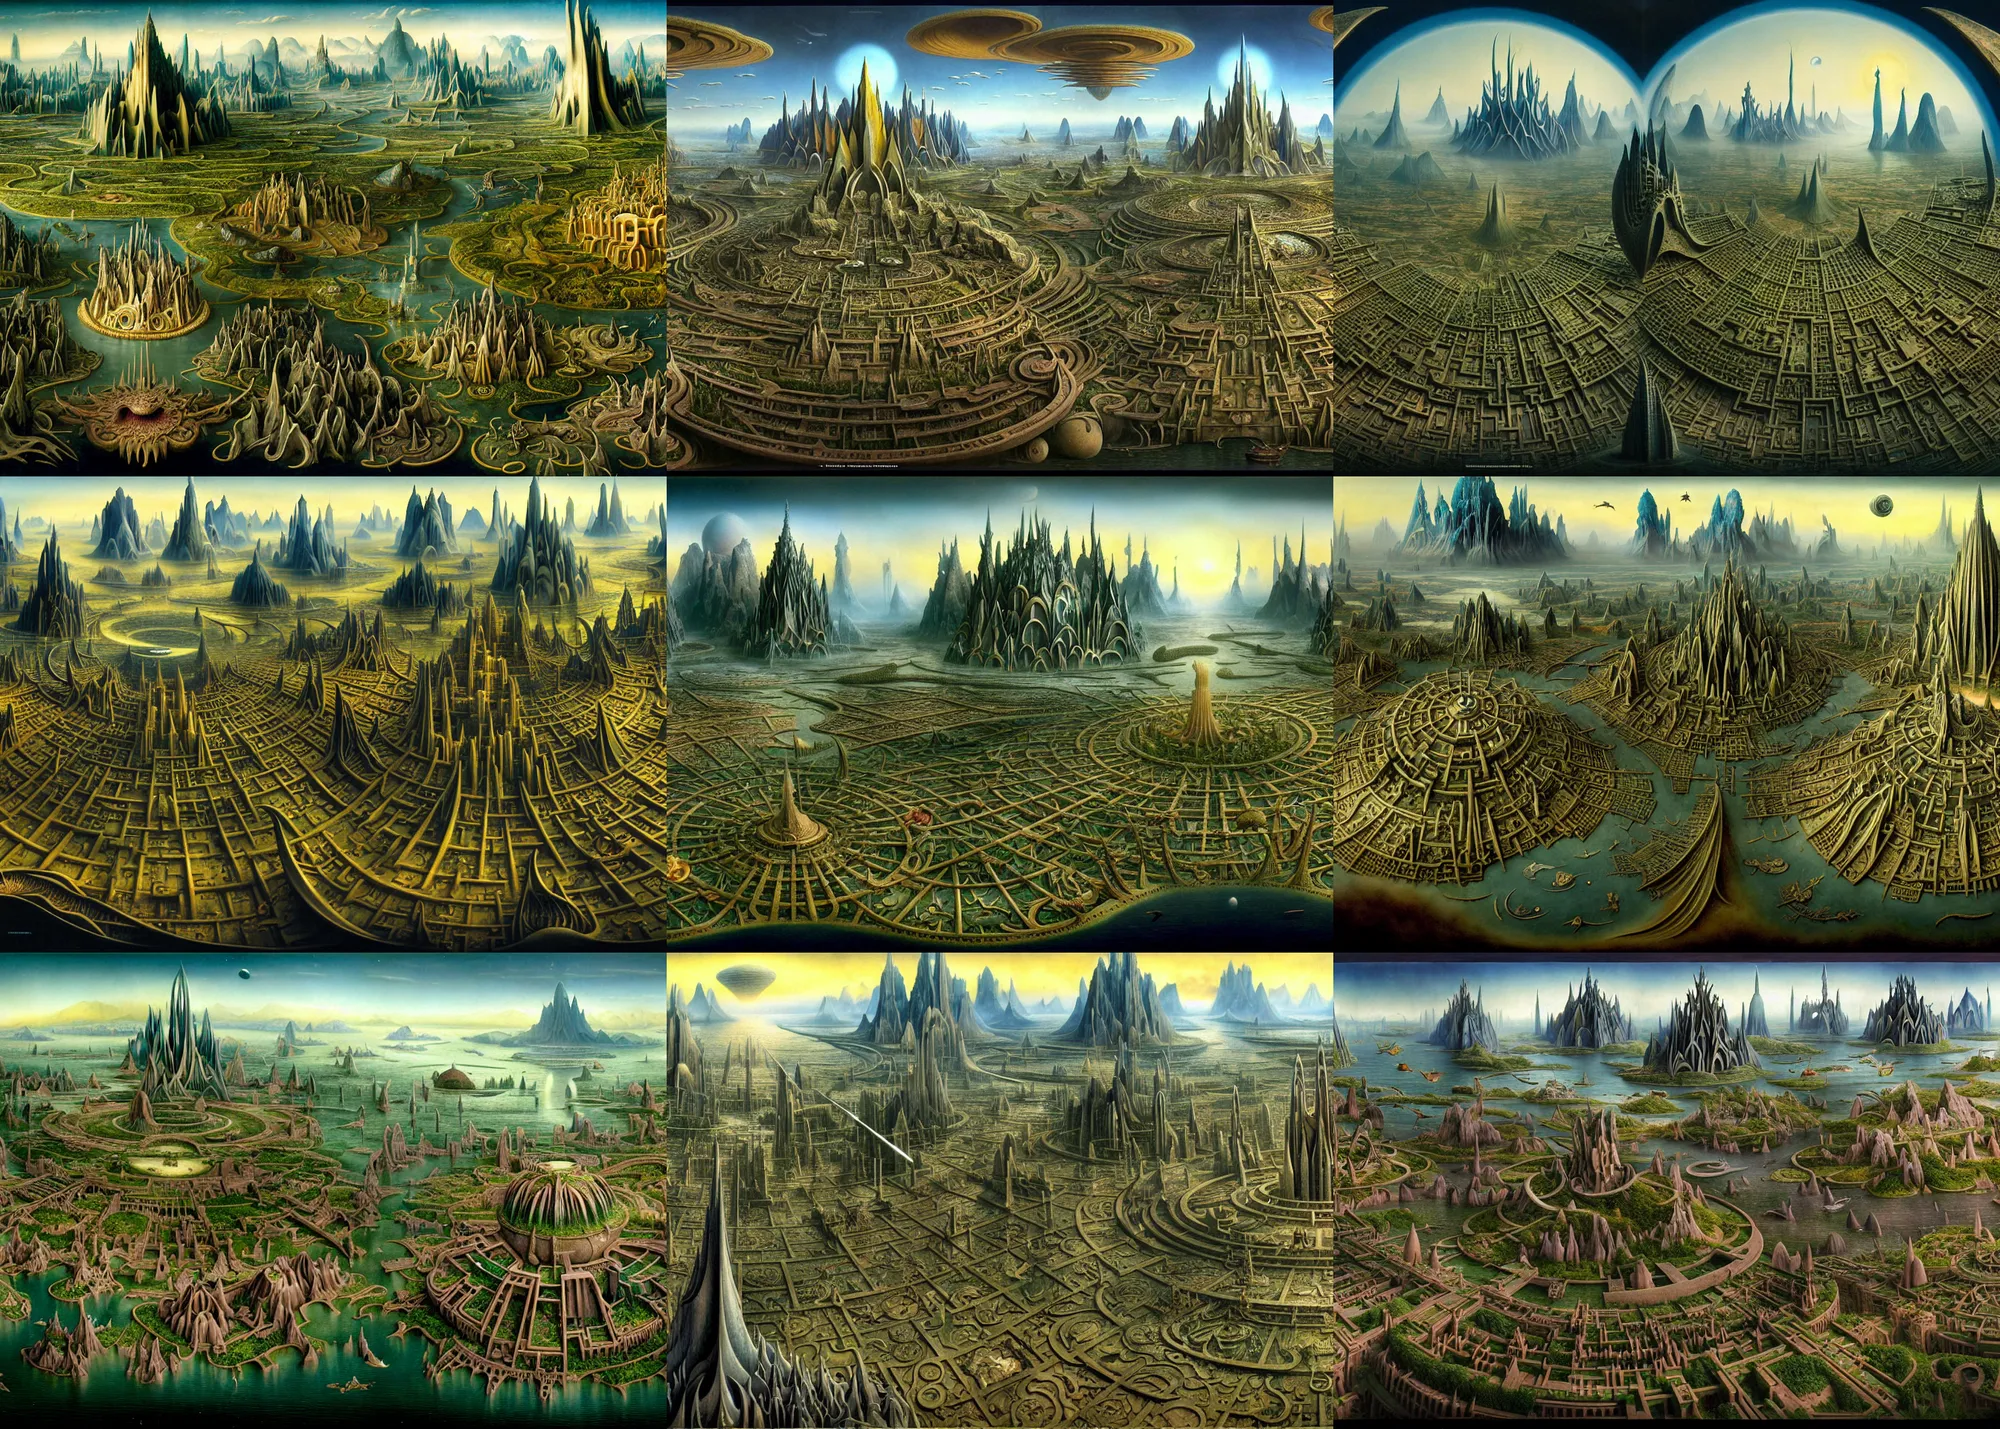 Prompt: a beautiful and insanely detailed matte painting of an advanced sprawling civilization with surreal architecture designed by Heironymous Bosch and Jim Burns, mega structures inspired by Heironymous Bosch's Garden of Earthly Delights, a beautiful and insanely detailed matte painting of an advanced sprawling civilization with surreal architecture designed by Heironymous Bosch and Jim Burns, mega structures inspired by Heironymous Bosch's Garden of Earthly Delights, a beautiful and insanely detailed matte painting of an advanced sprawling civilization with surreal architecture designed by Heironymous Bosch and Jim Burns, mega structures inspired by Heironymous Bosch's Garden of Earthly Delights, vast landscape by Jim Burns and Tyler Edlin, dark sci-fi concept art, vast horizons by Jim Burns and Tyler Edlin, masterpiece!!, grand!, imaginative!!!, whimsical!!, epic scale, intricate details, sense of awe, elite